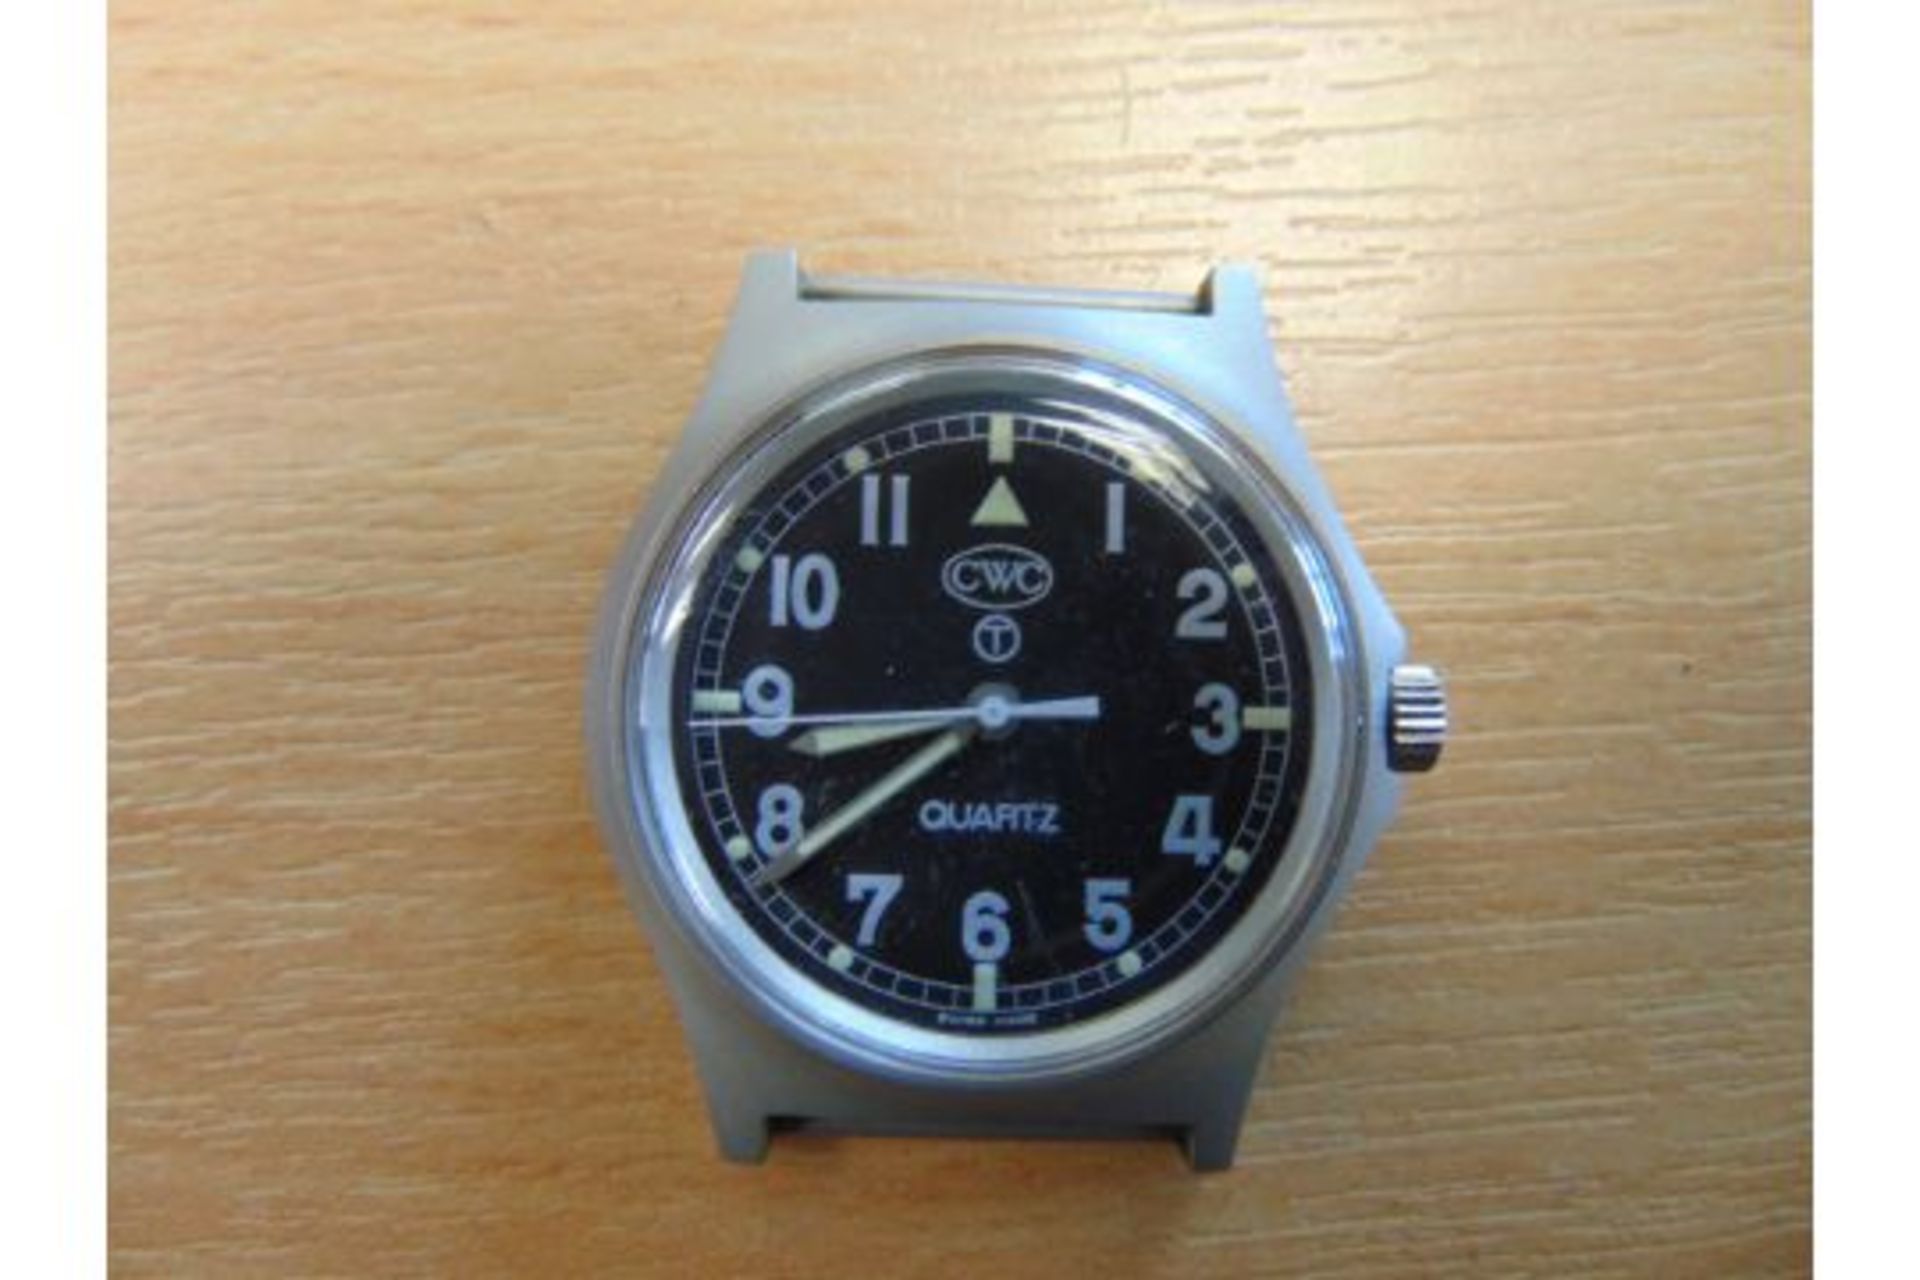 V Rare Unissued CWC (Cabot Watch Co Switzerland) 0552 Royal Marines / Navy Issue Service Watch 1990 - Image 2 of 3